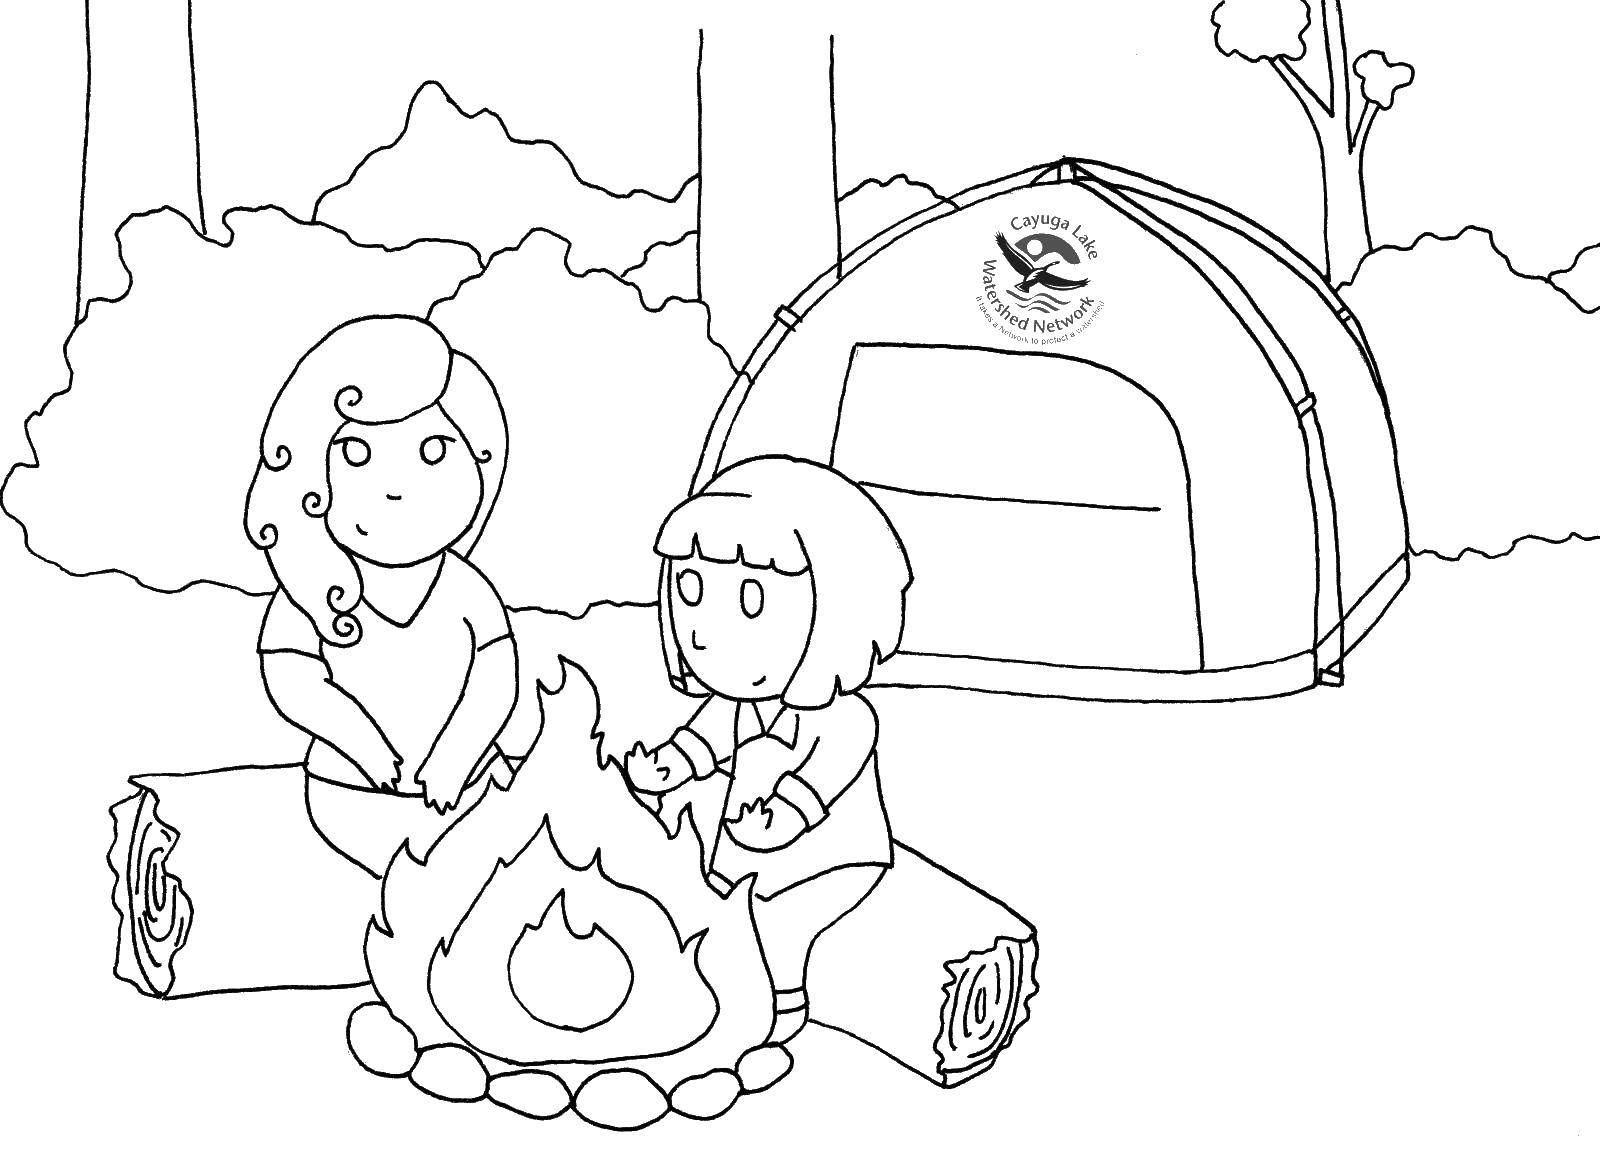 Coloring Mother and daughter outdoors. Category Camping. Tags:  mother, daughter, tent, campfire.